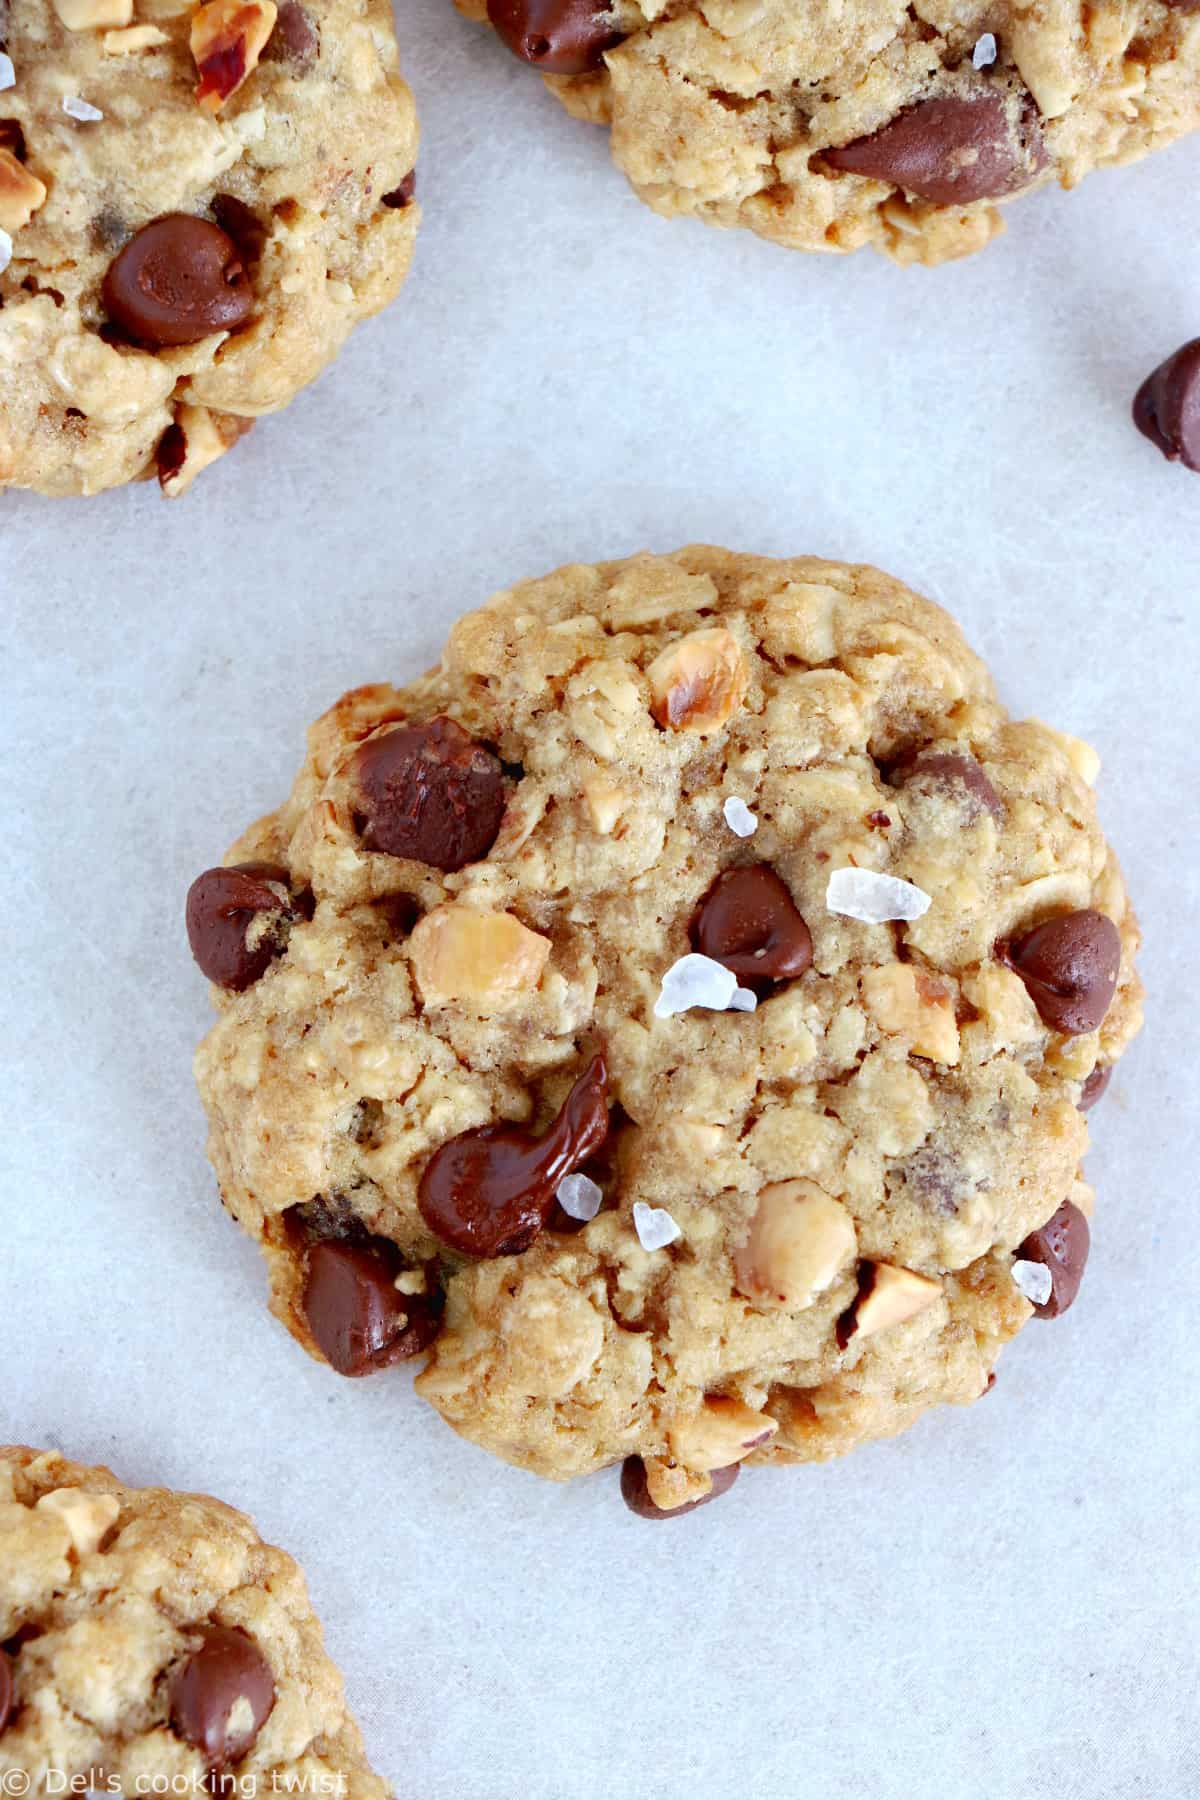 Simple chocolate chip oatmeal cookies with hazelnuts are perfect bakery-style cookies. They are easy to make, with old fashioned oats, chocolate chips and chopped hazelnuts.